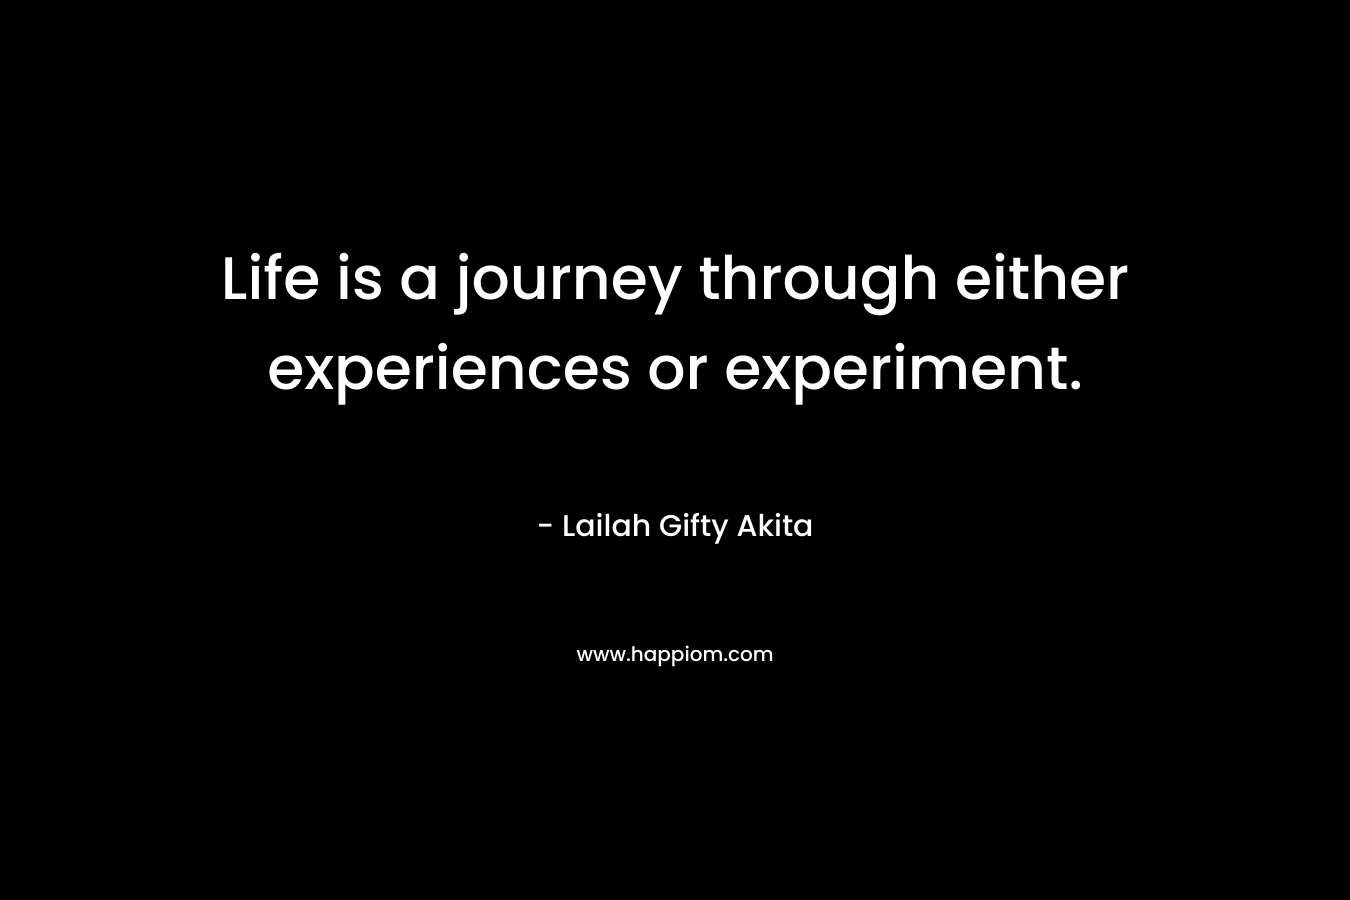 Life is a journey through either experiences or experiment. – Lailah Gifty Akita